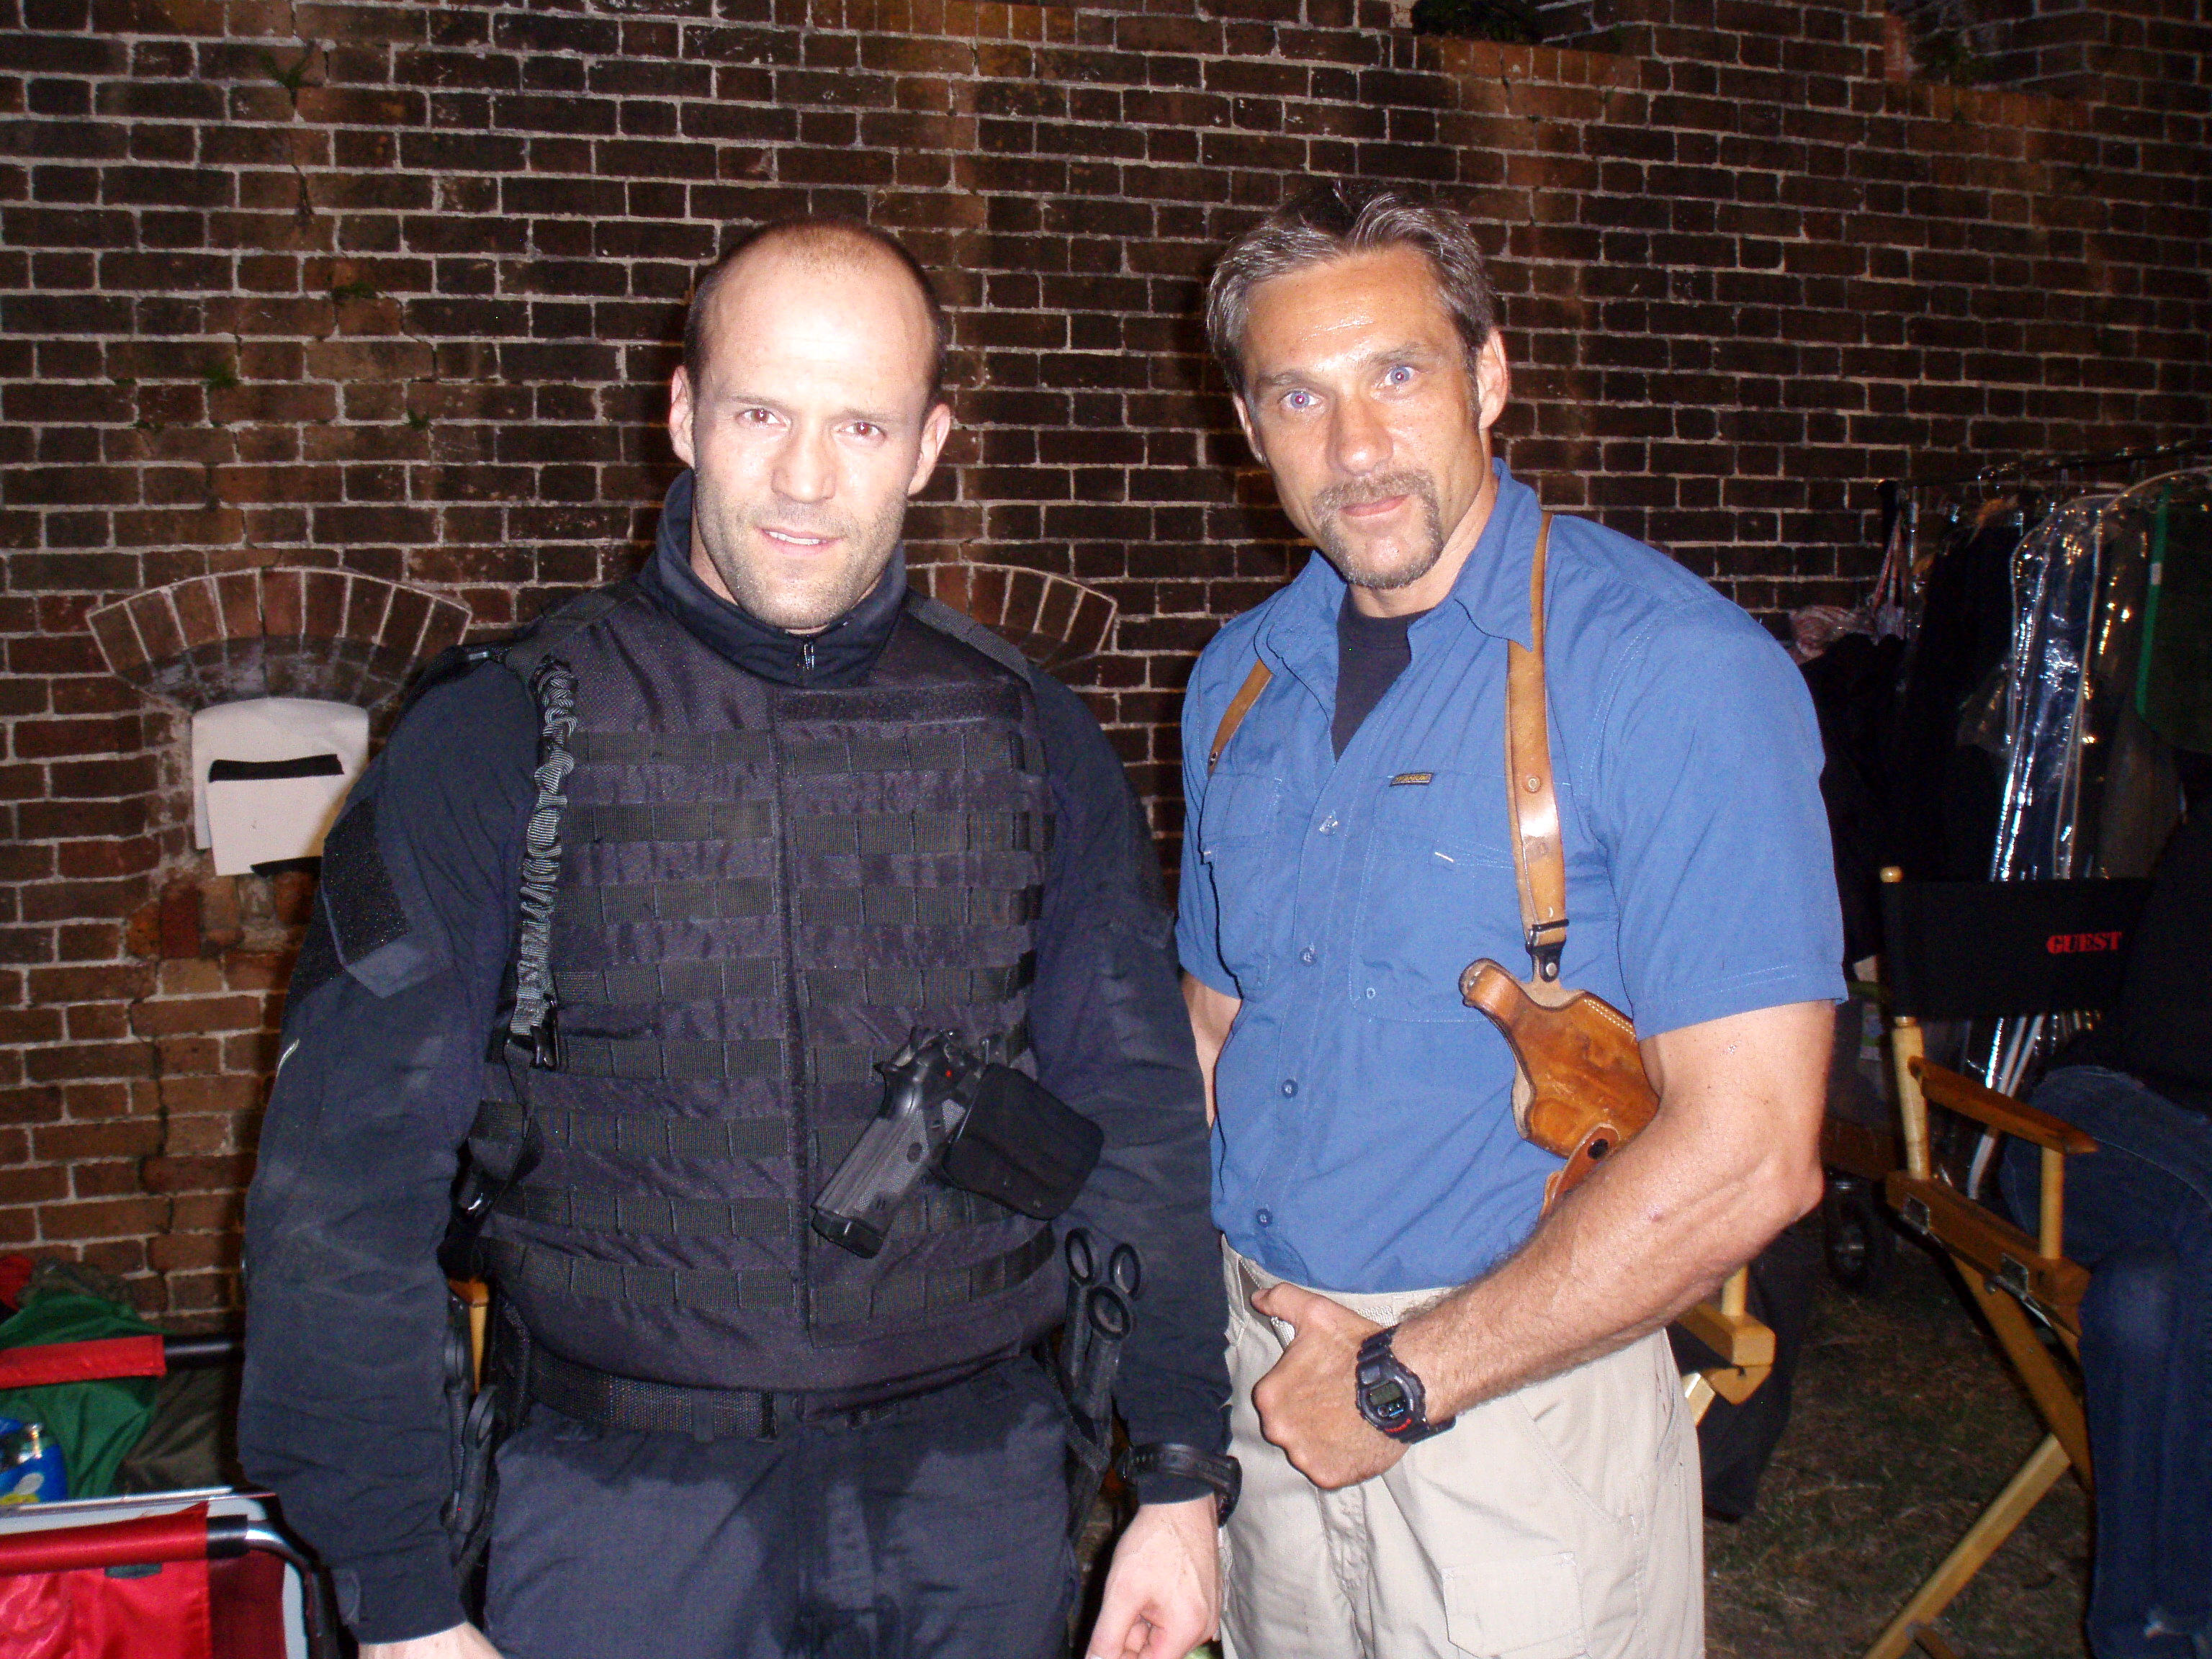 W/Jason Statham on the set of 'Expendables'